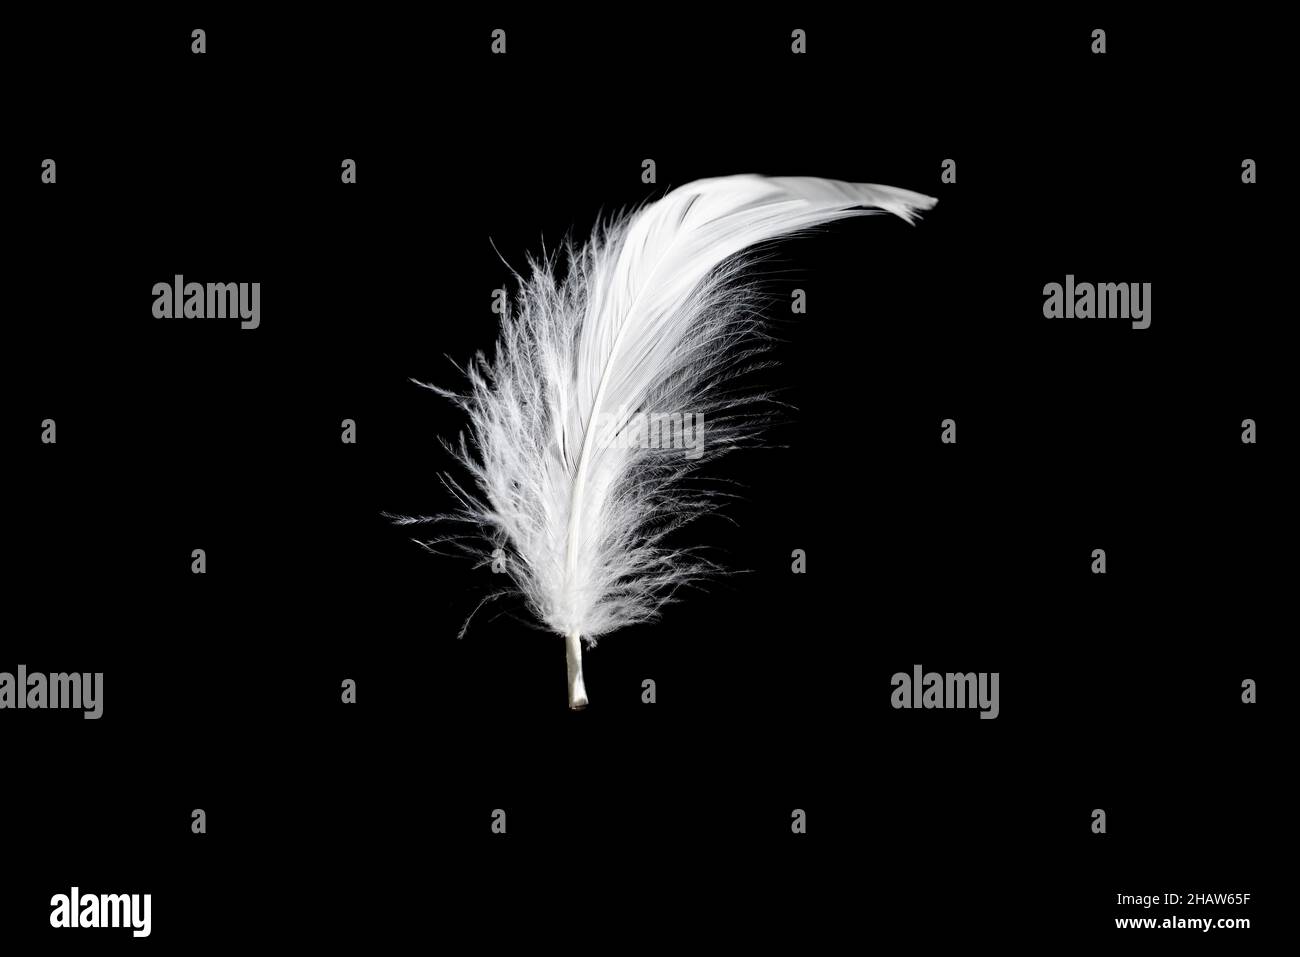 White floating feather isolated on a black background. Stock Photo